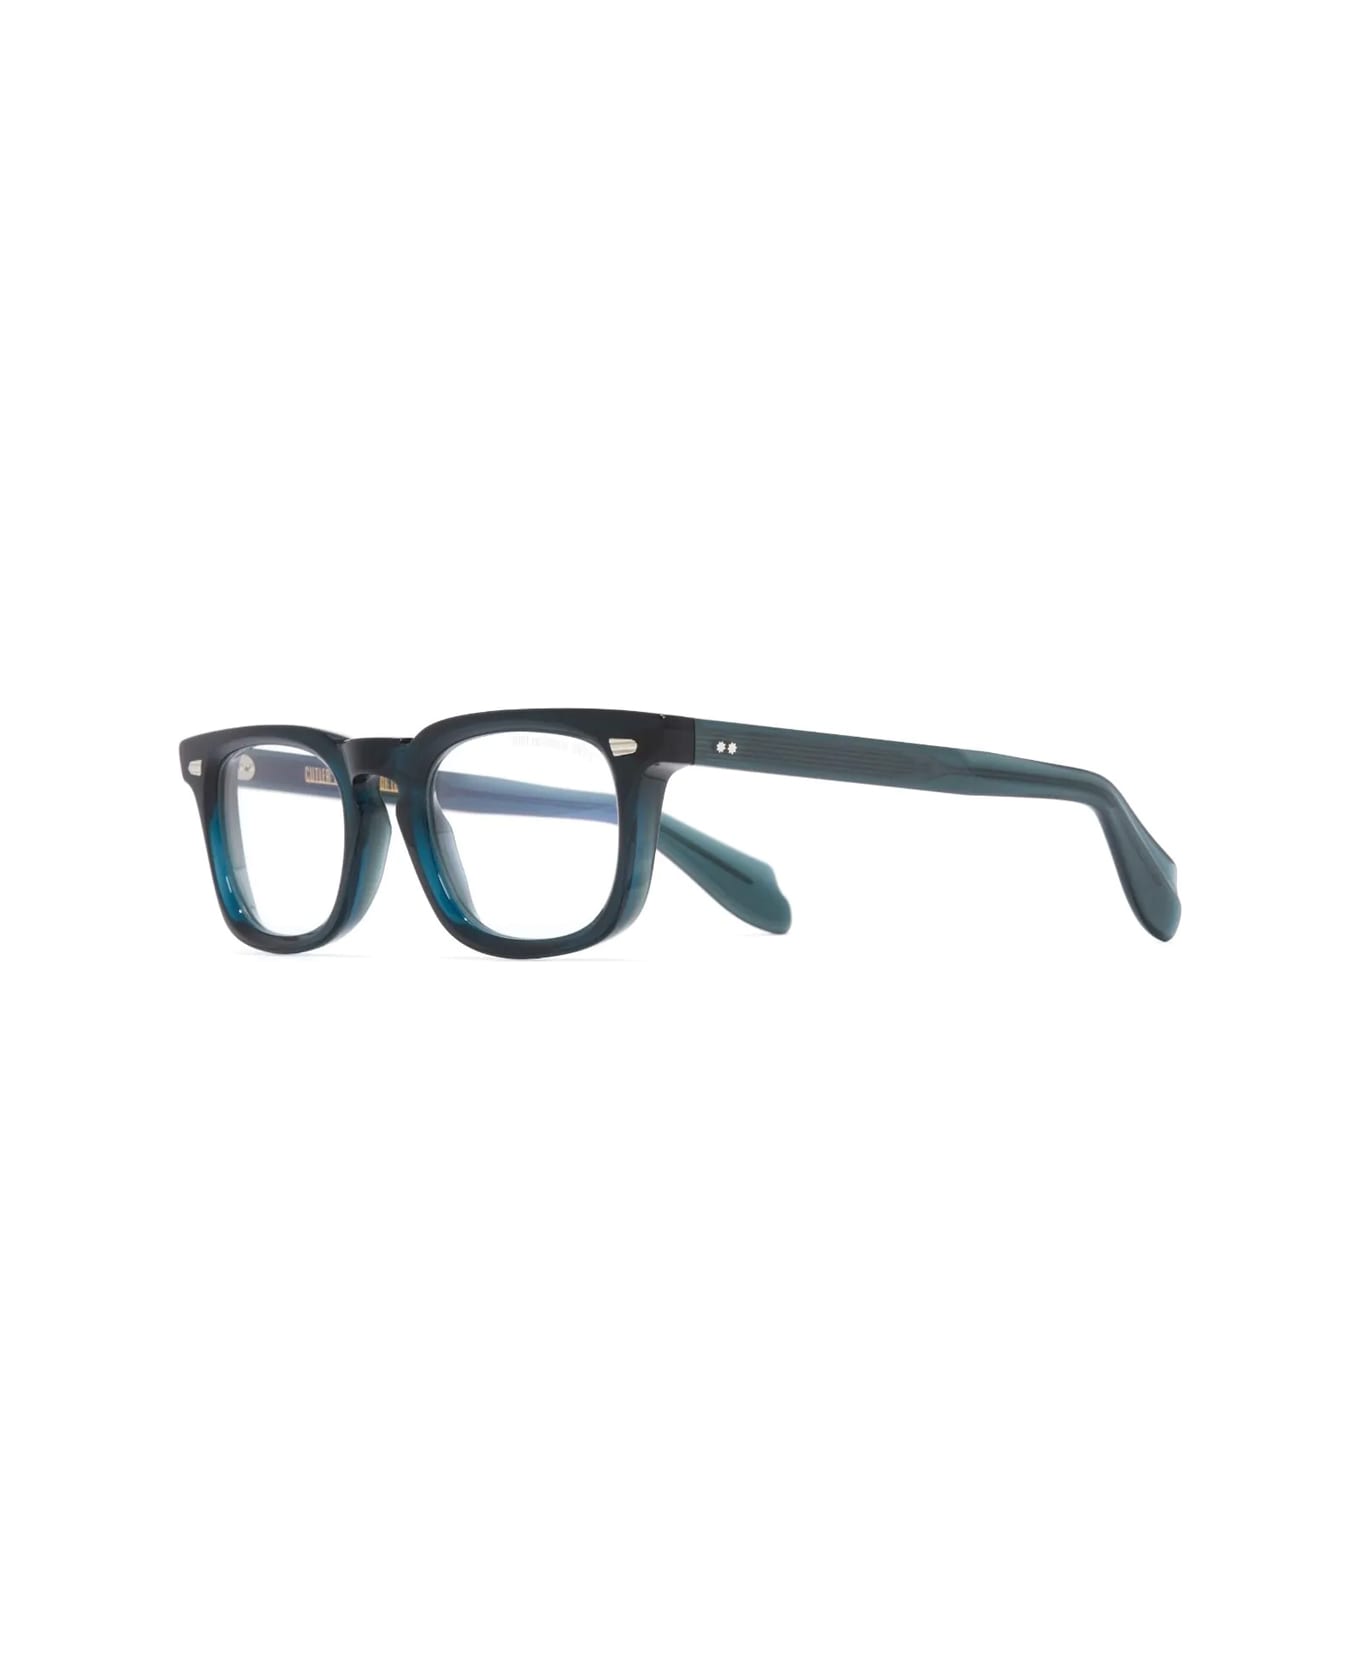 Cutler and Gross 1406 03 Glasses - Grigio